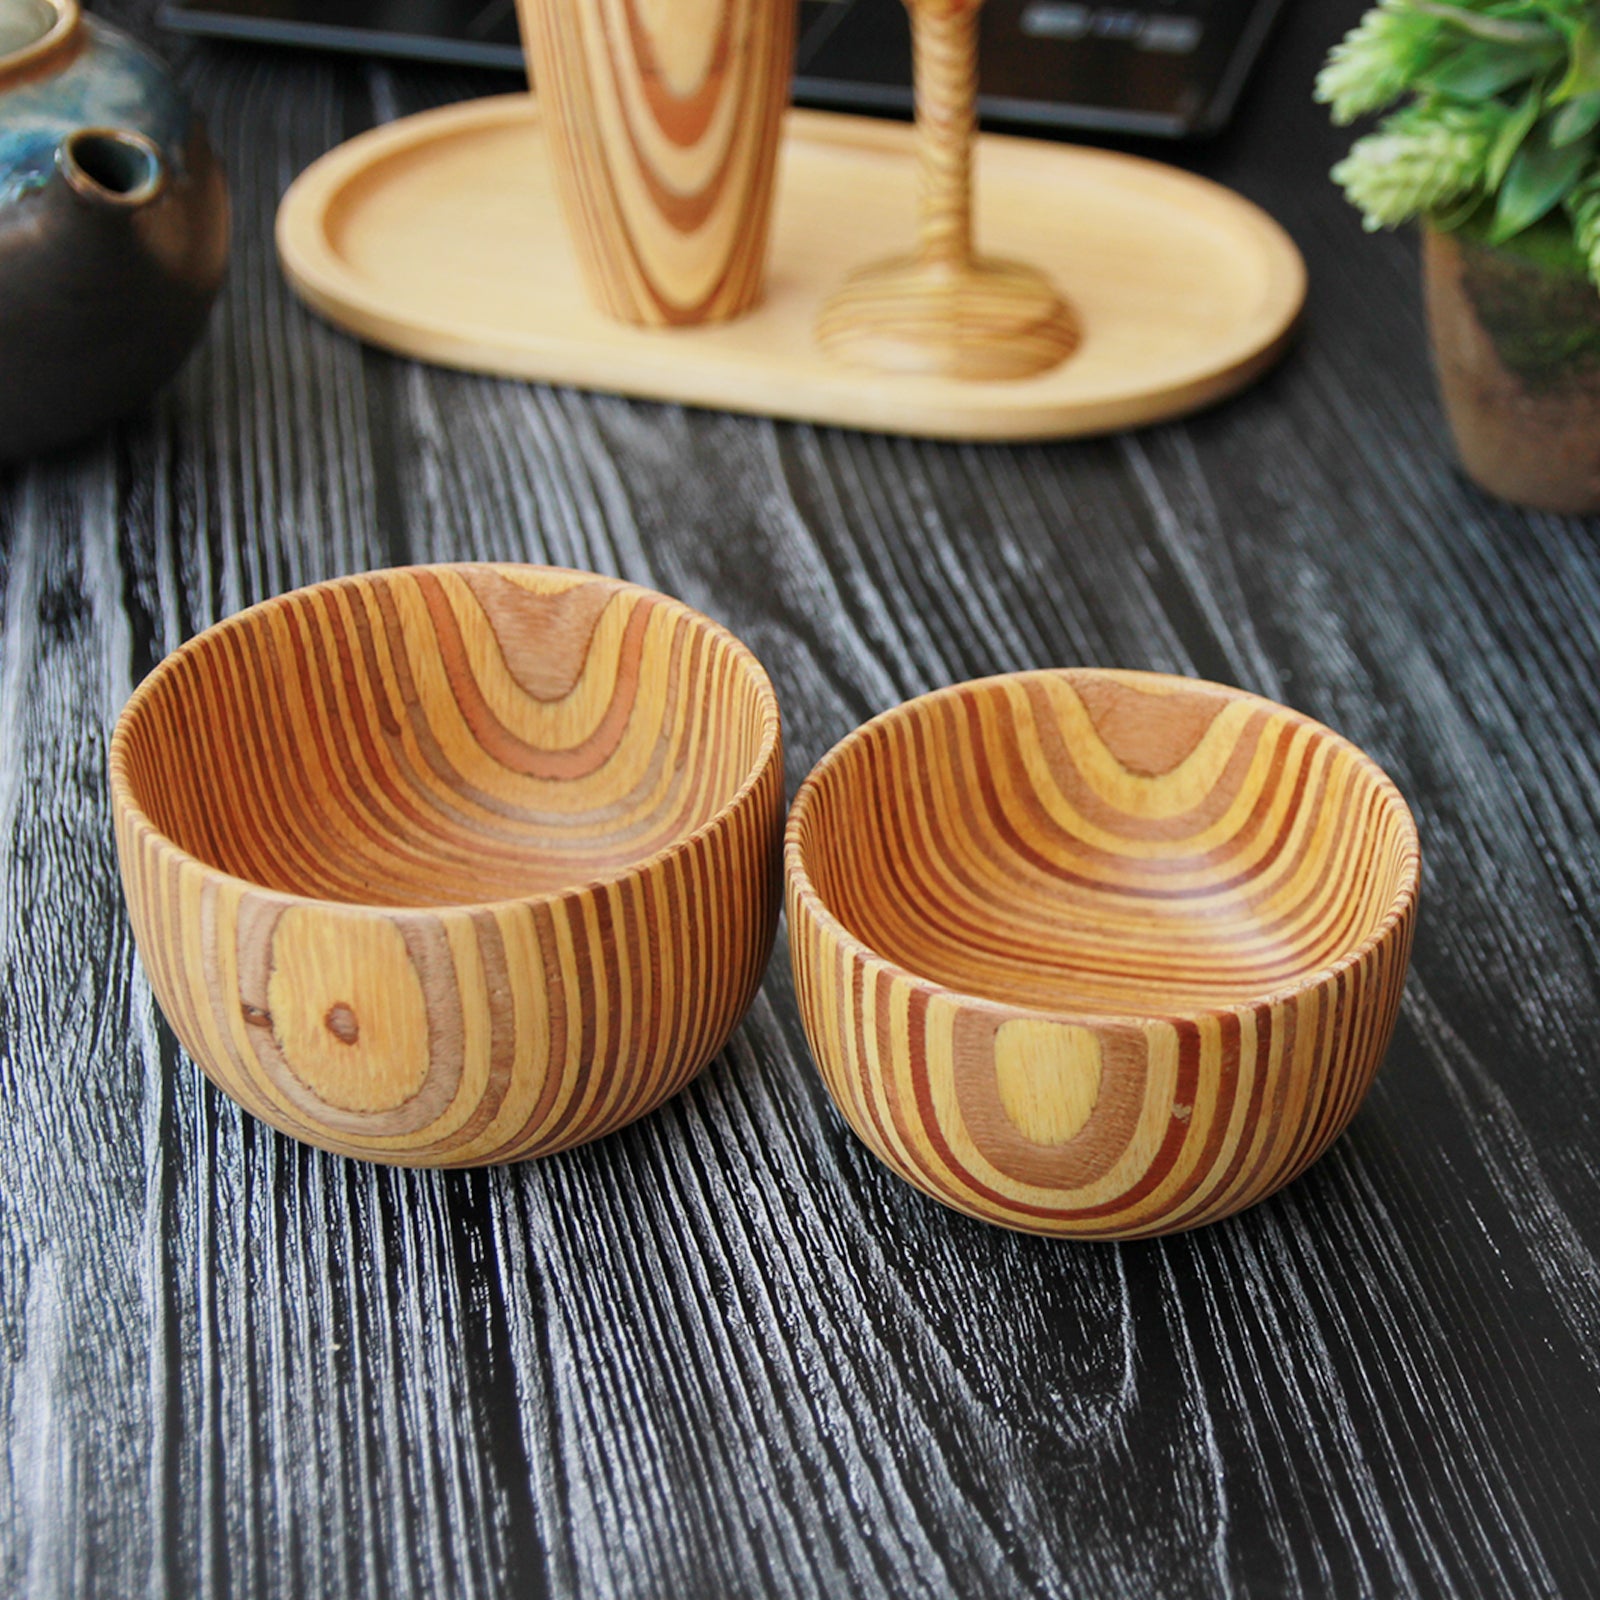 Two wooden handmade bowls in a patterned plywood style.